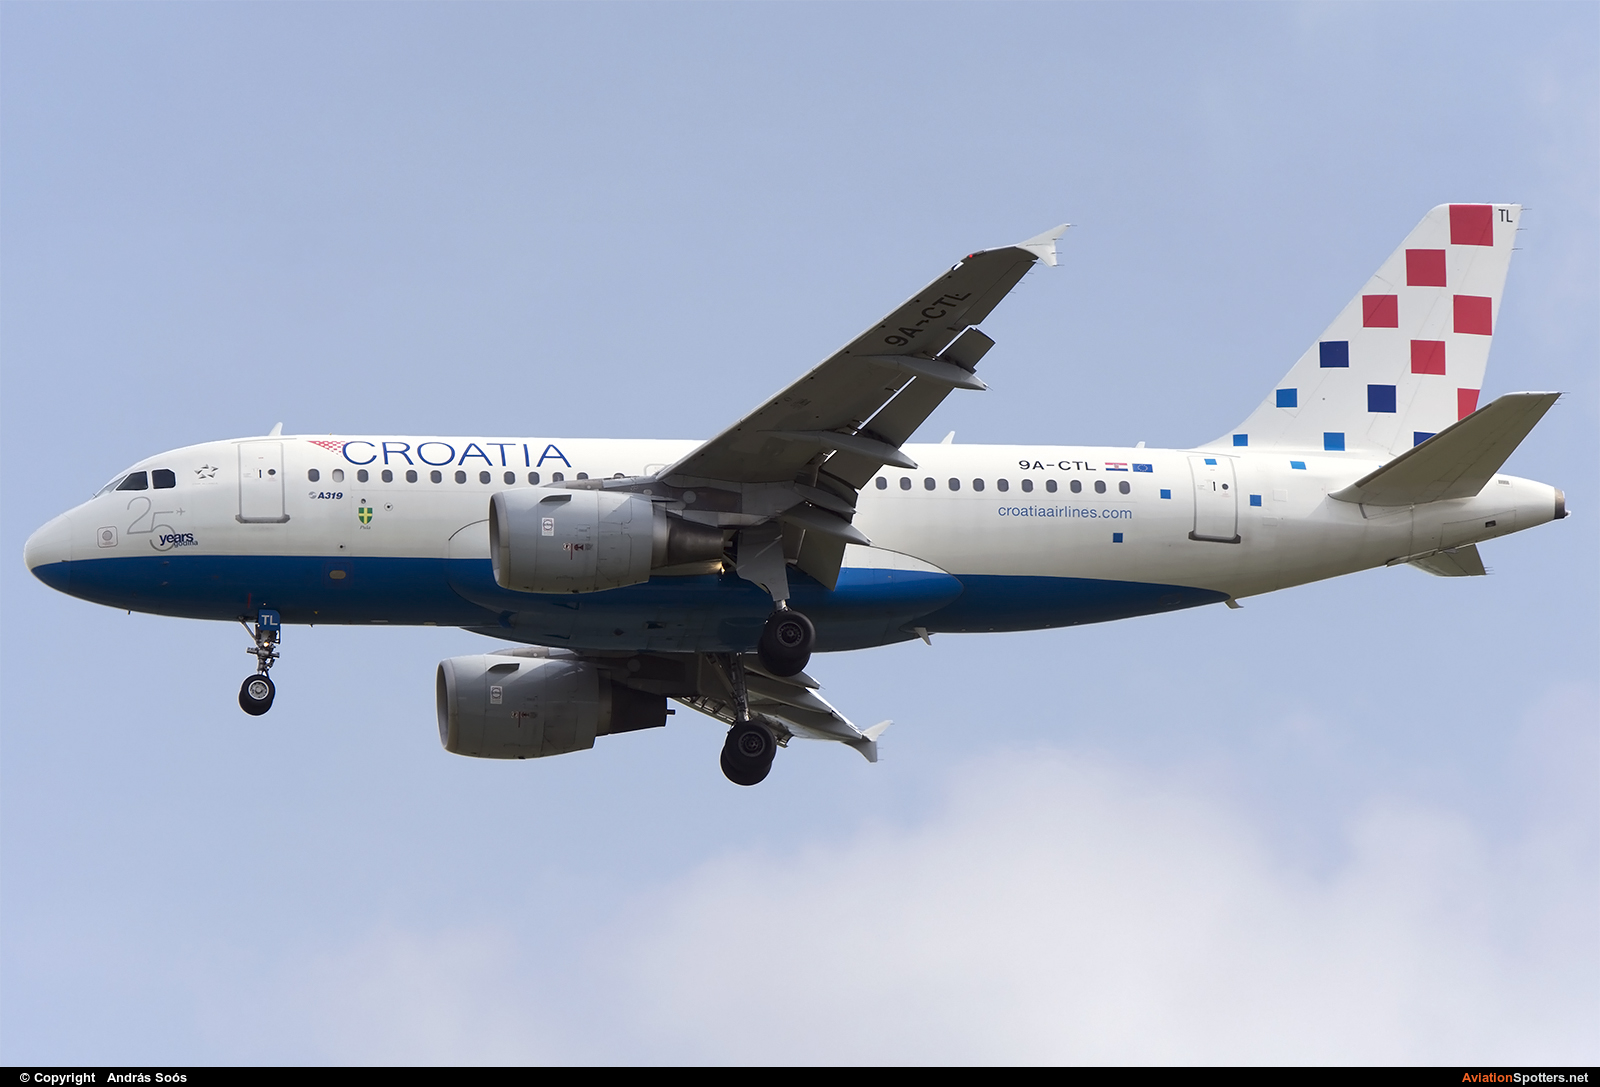 Croatia Airlines  -  A319-112  (9A-CTL) By András Soós (sas1965)